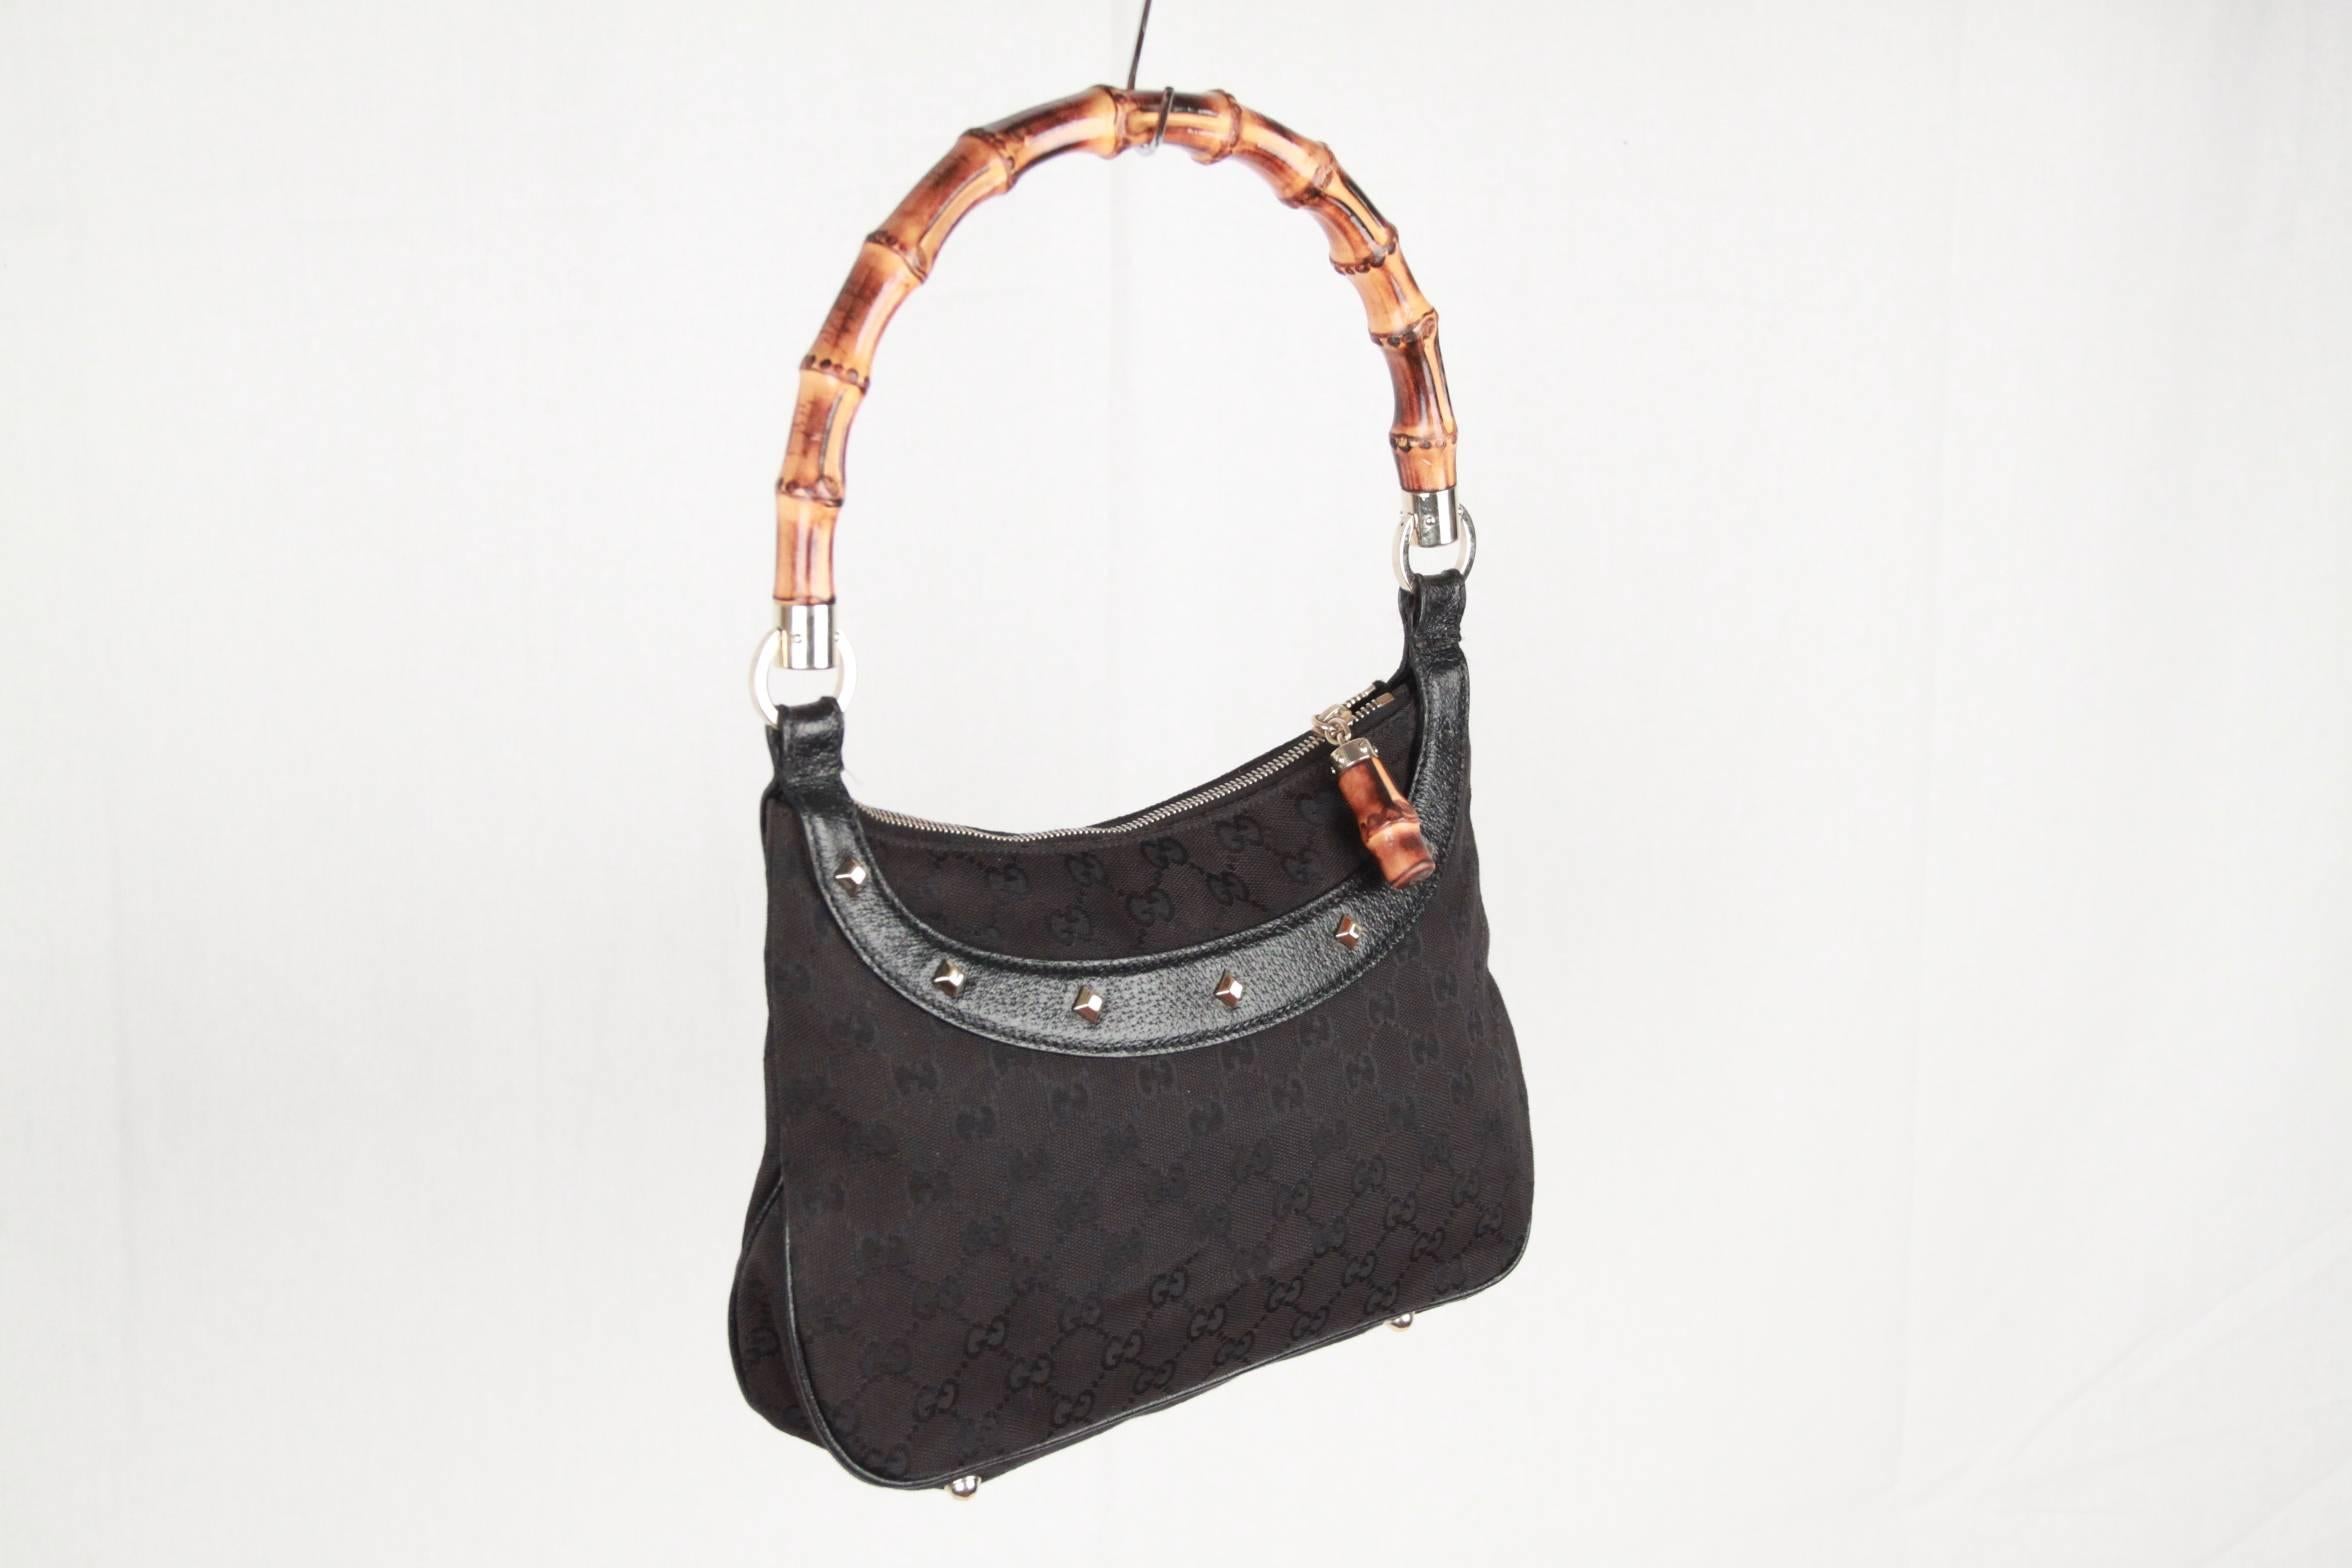 
Gucci small hobo crafted in black GG monogram canvas with black leather trims. This small hobo bag features a  bamboo handle,  upper zip closure with bamboo zuipper pull, gold-tone studs detailing, and protective base studs. Black fabric-lined